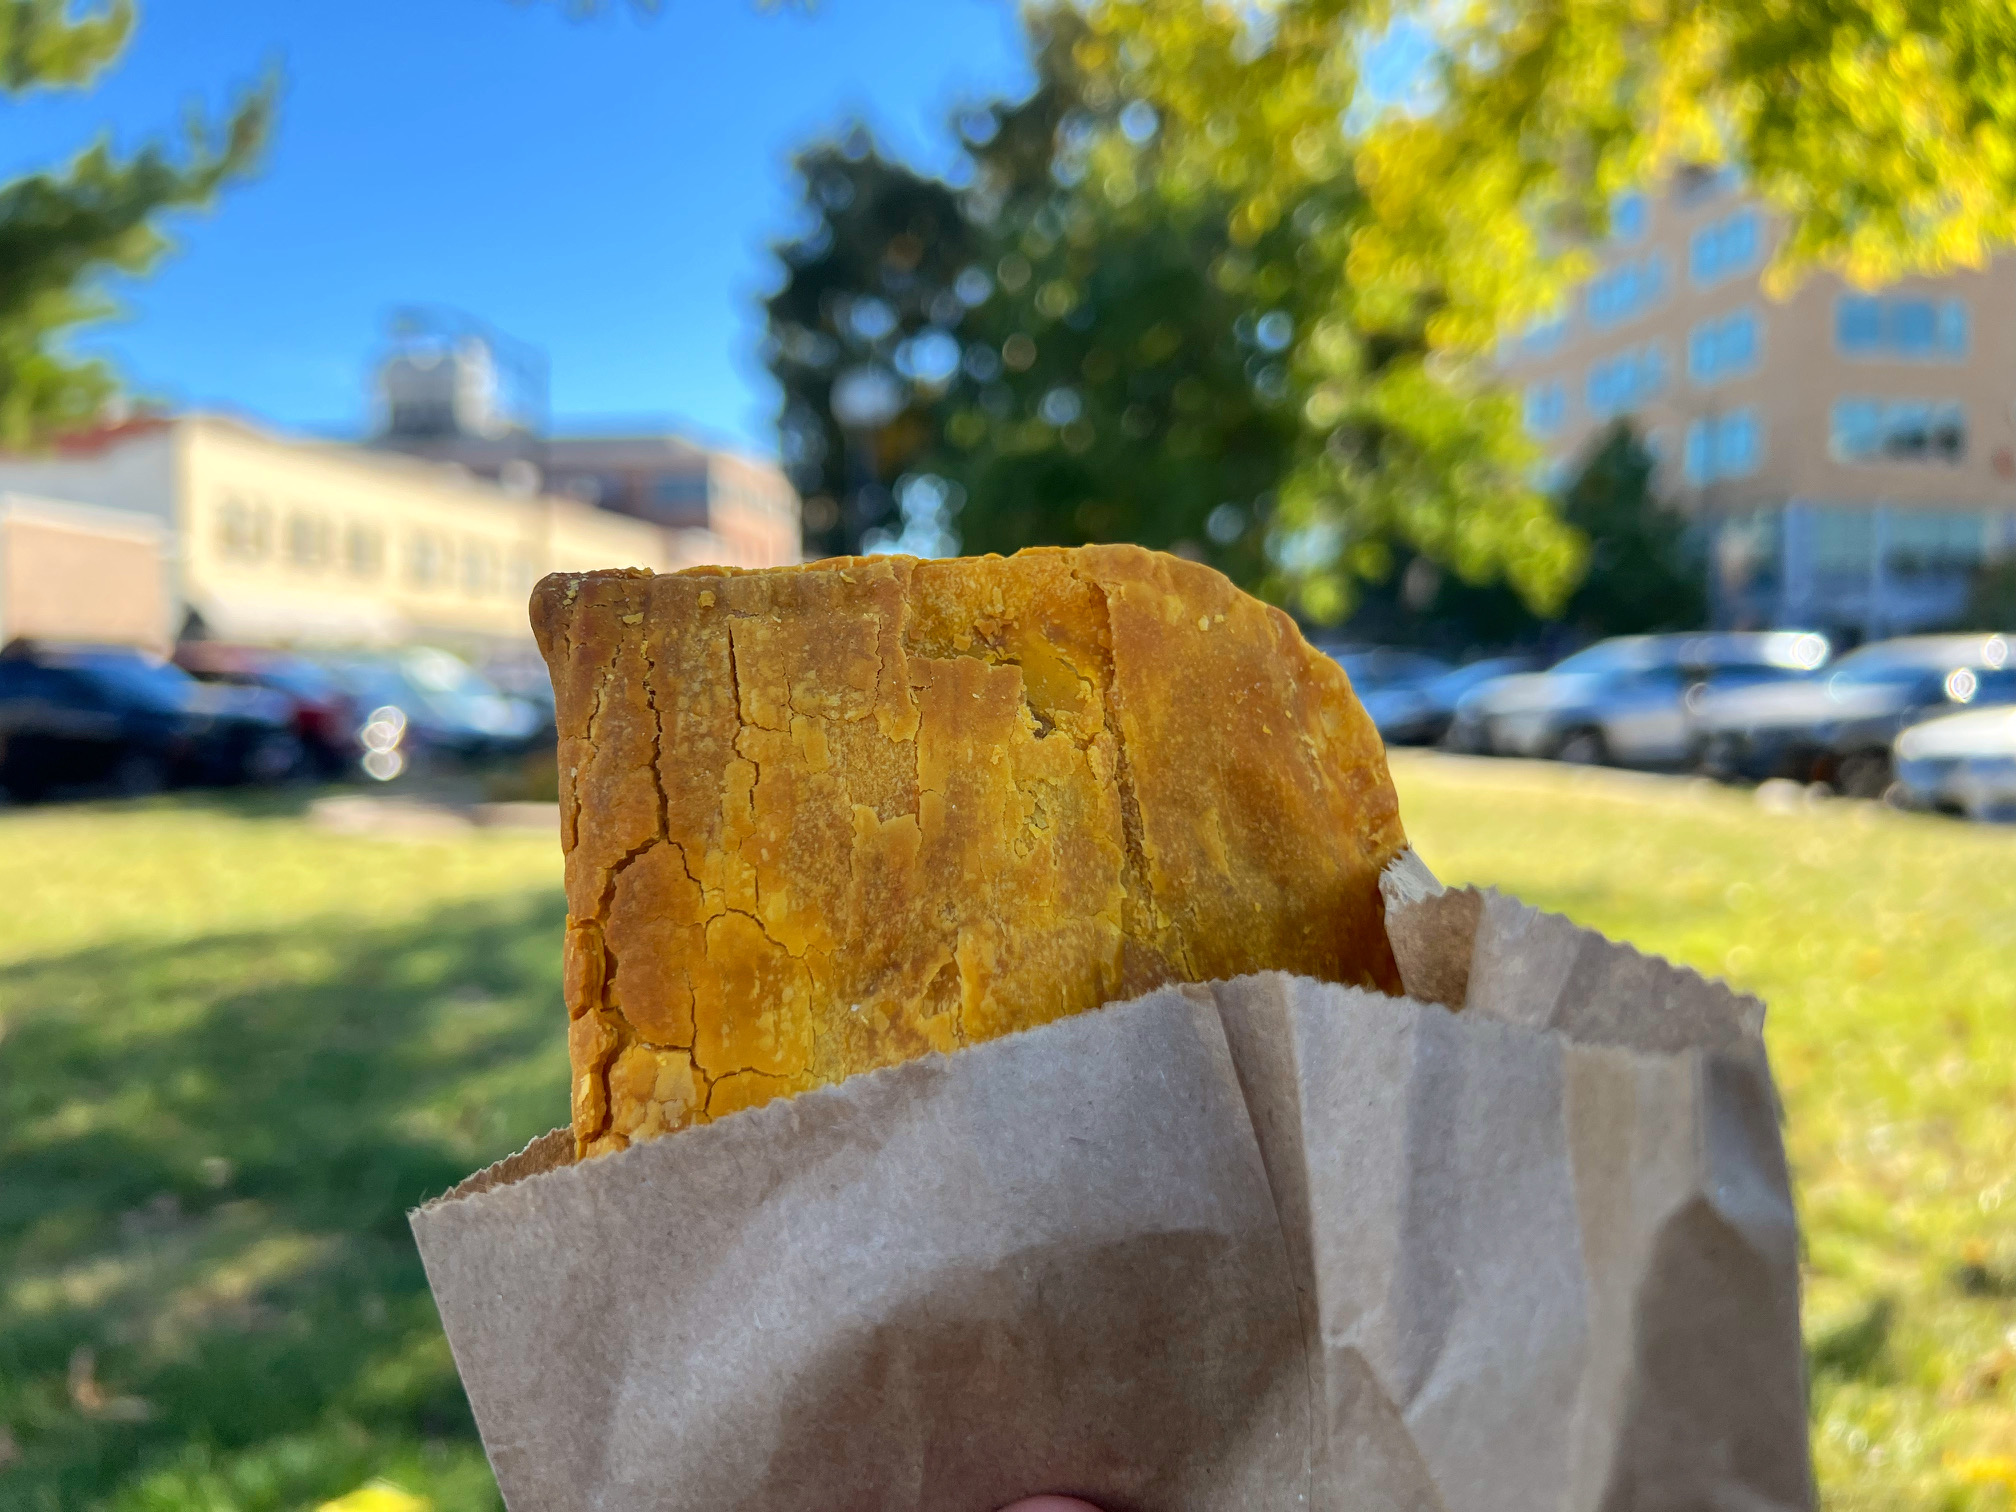 Outside at the Champaign market, there is a beef handpie from Stango held in a paper bag. Photo by Alyssa Buckley.